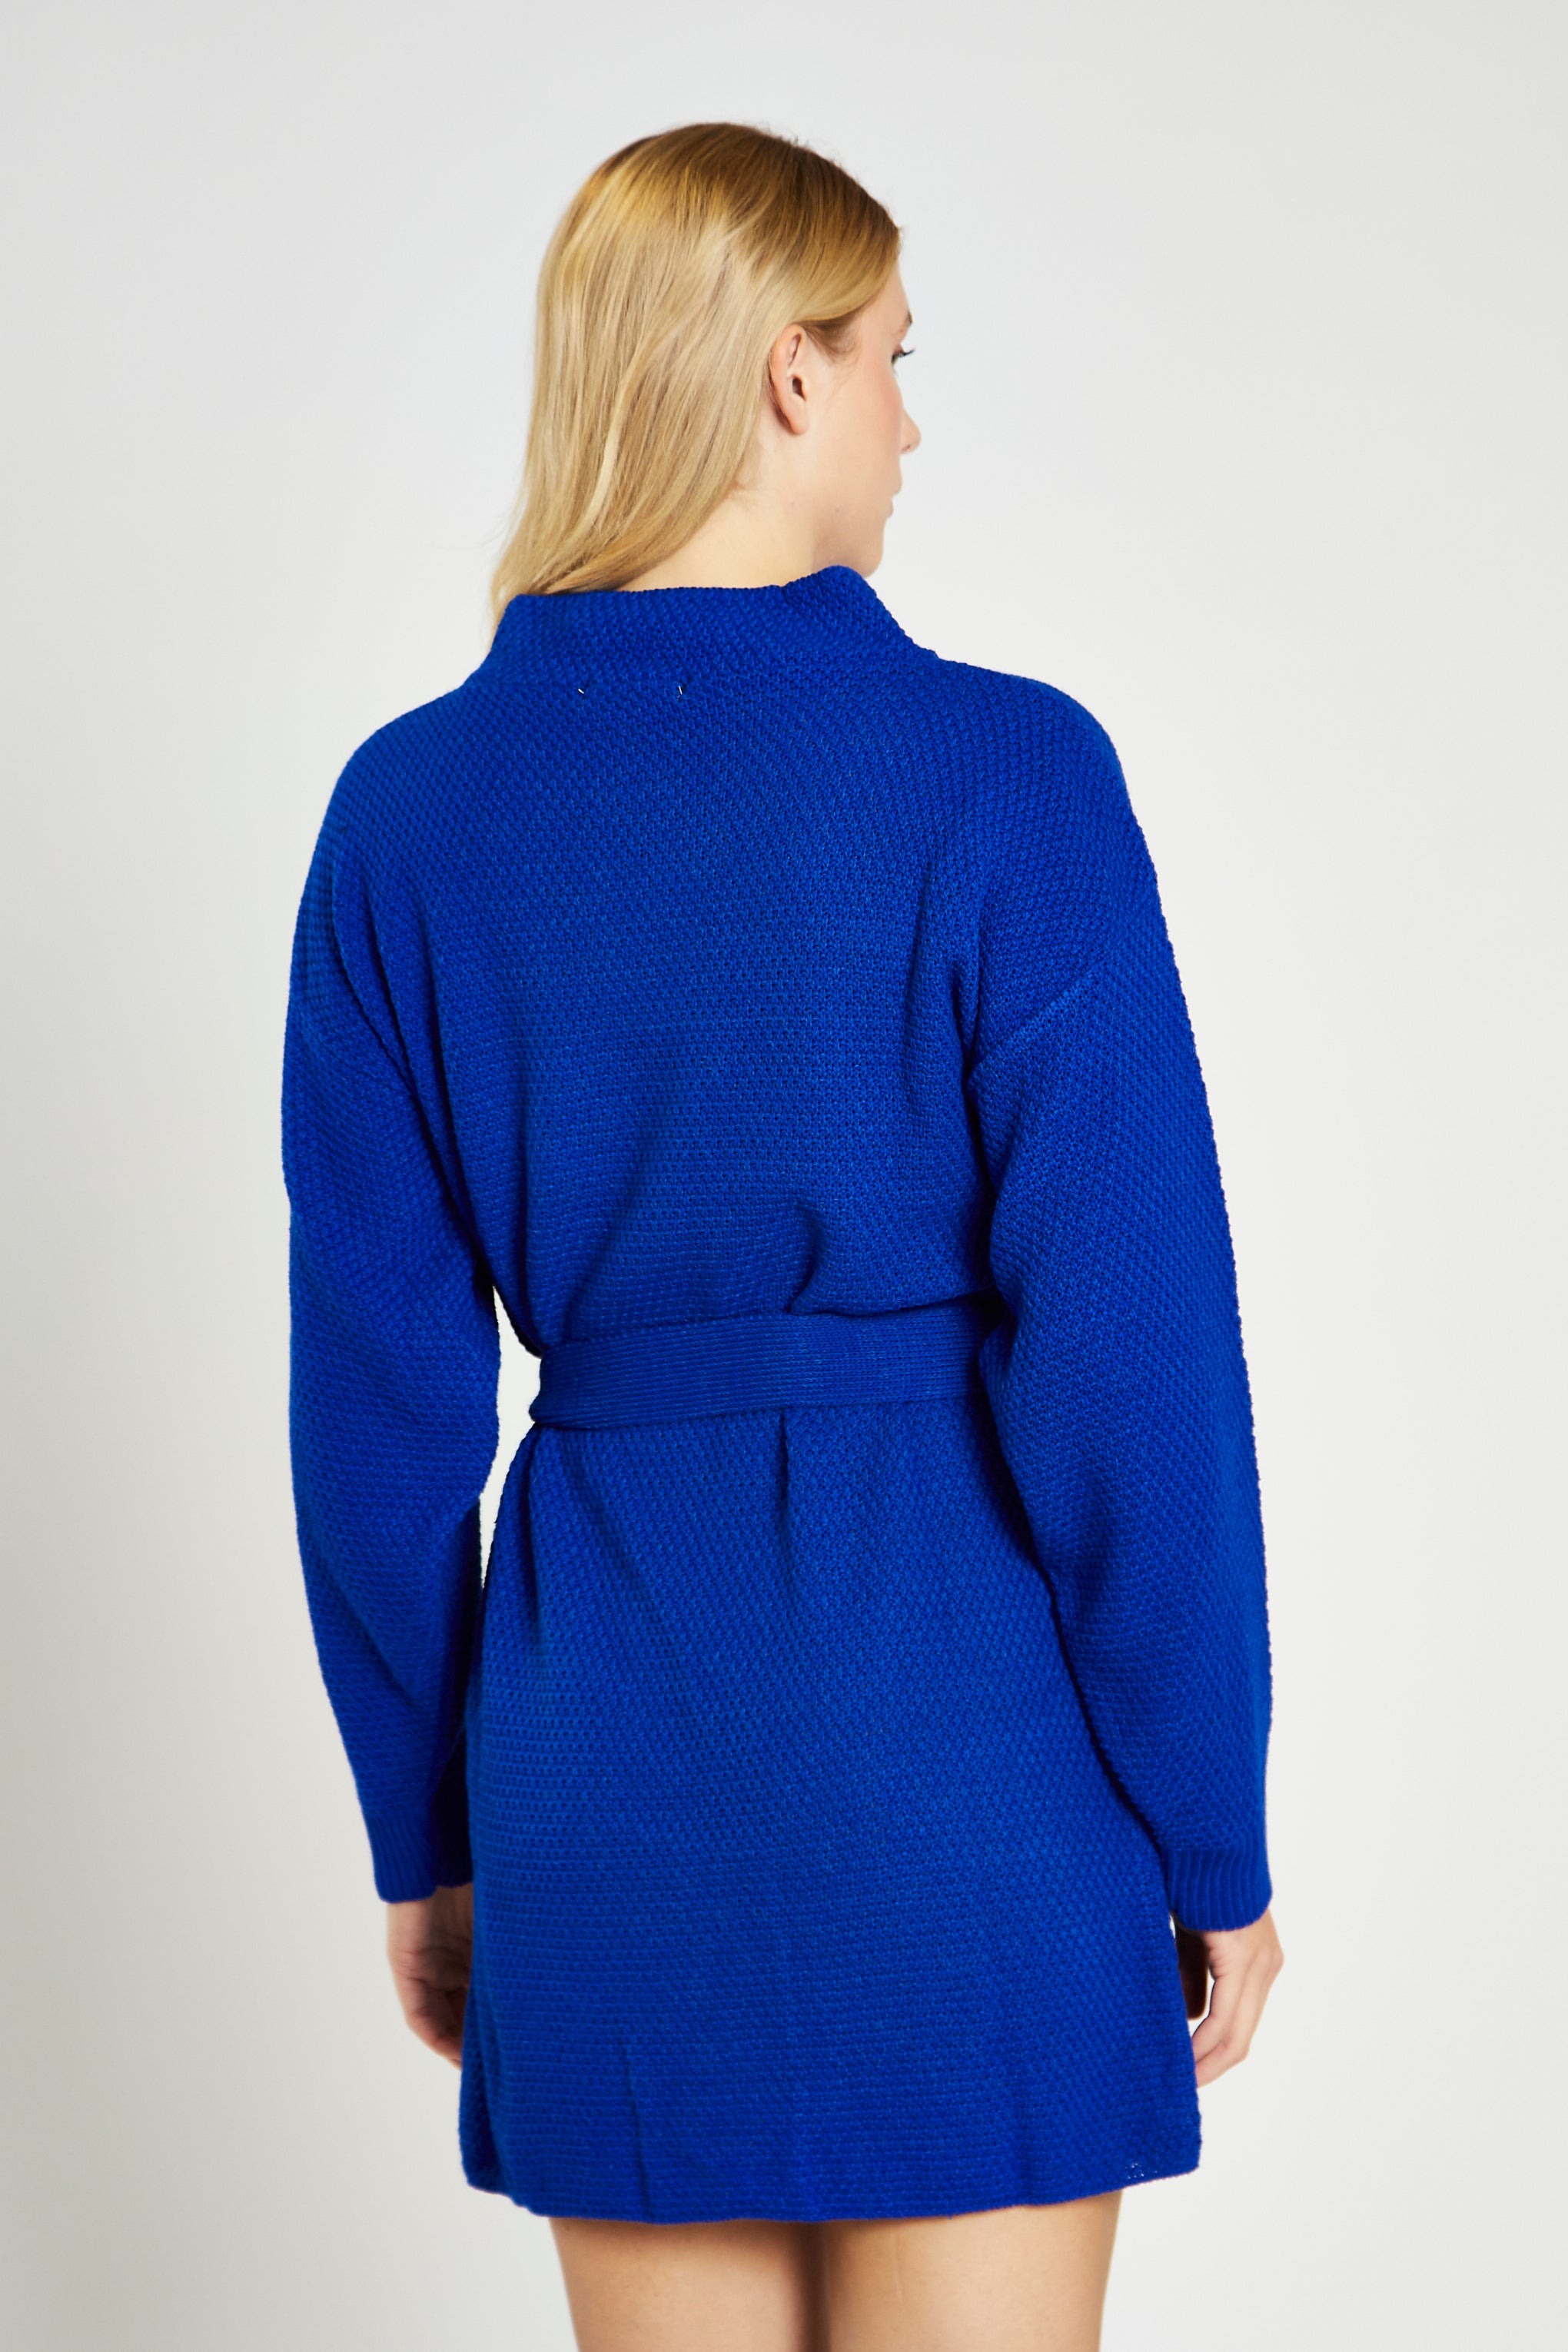 Glamorous Royal Blue Knitted Mini Dress with Tie Belt